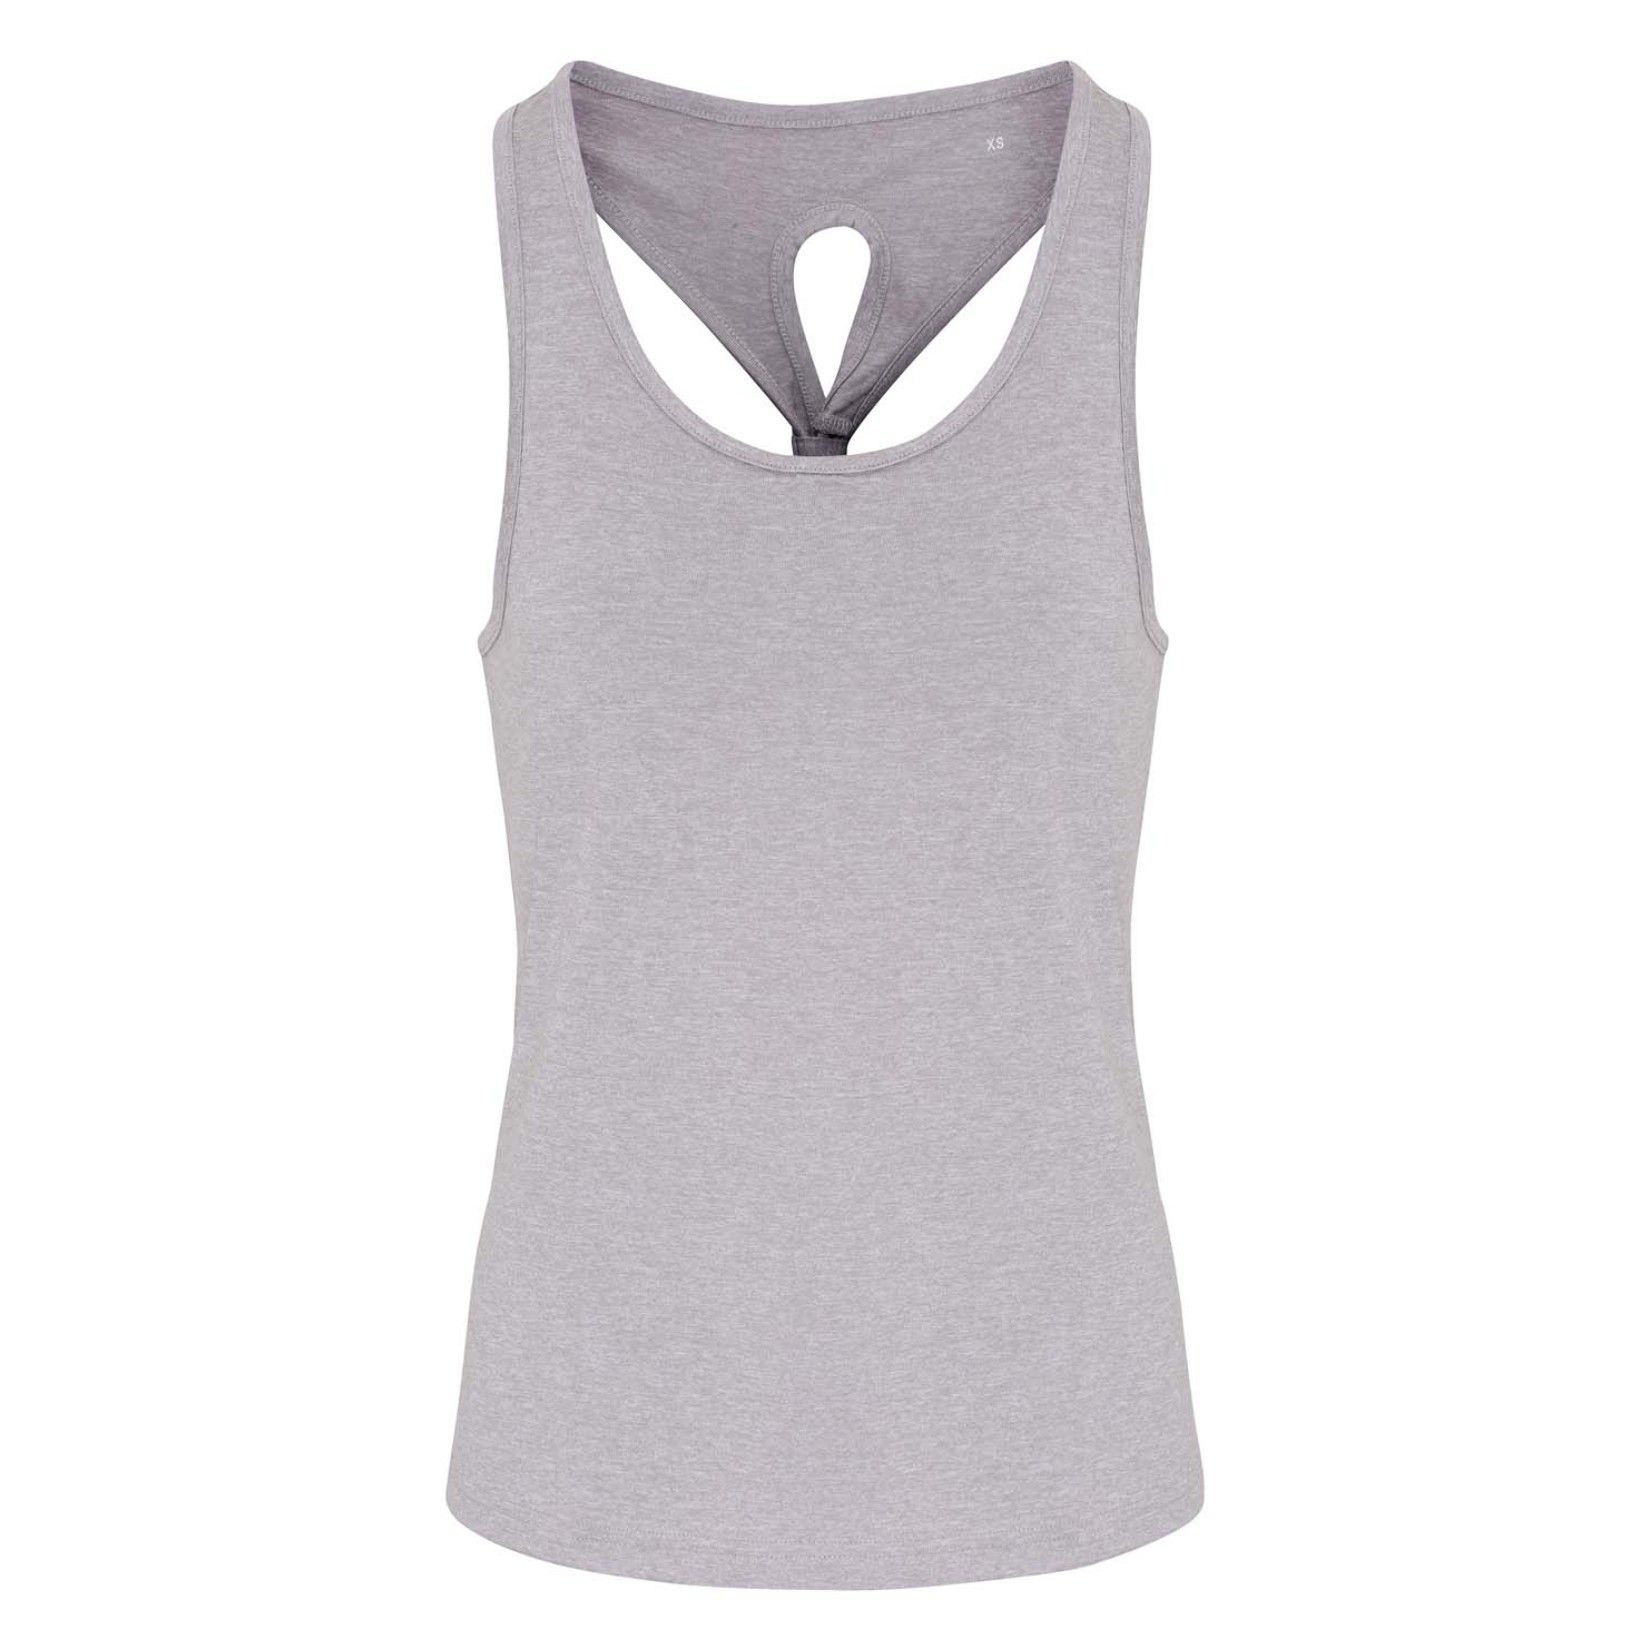  Womens Yoga Knotted Tank Top